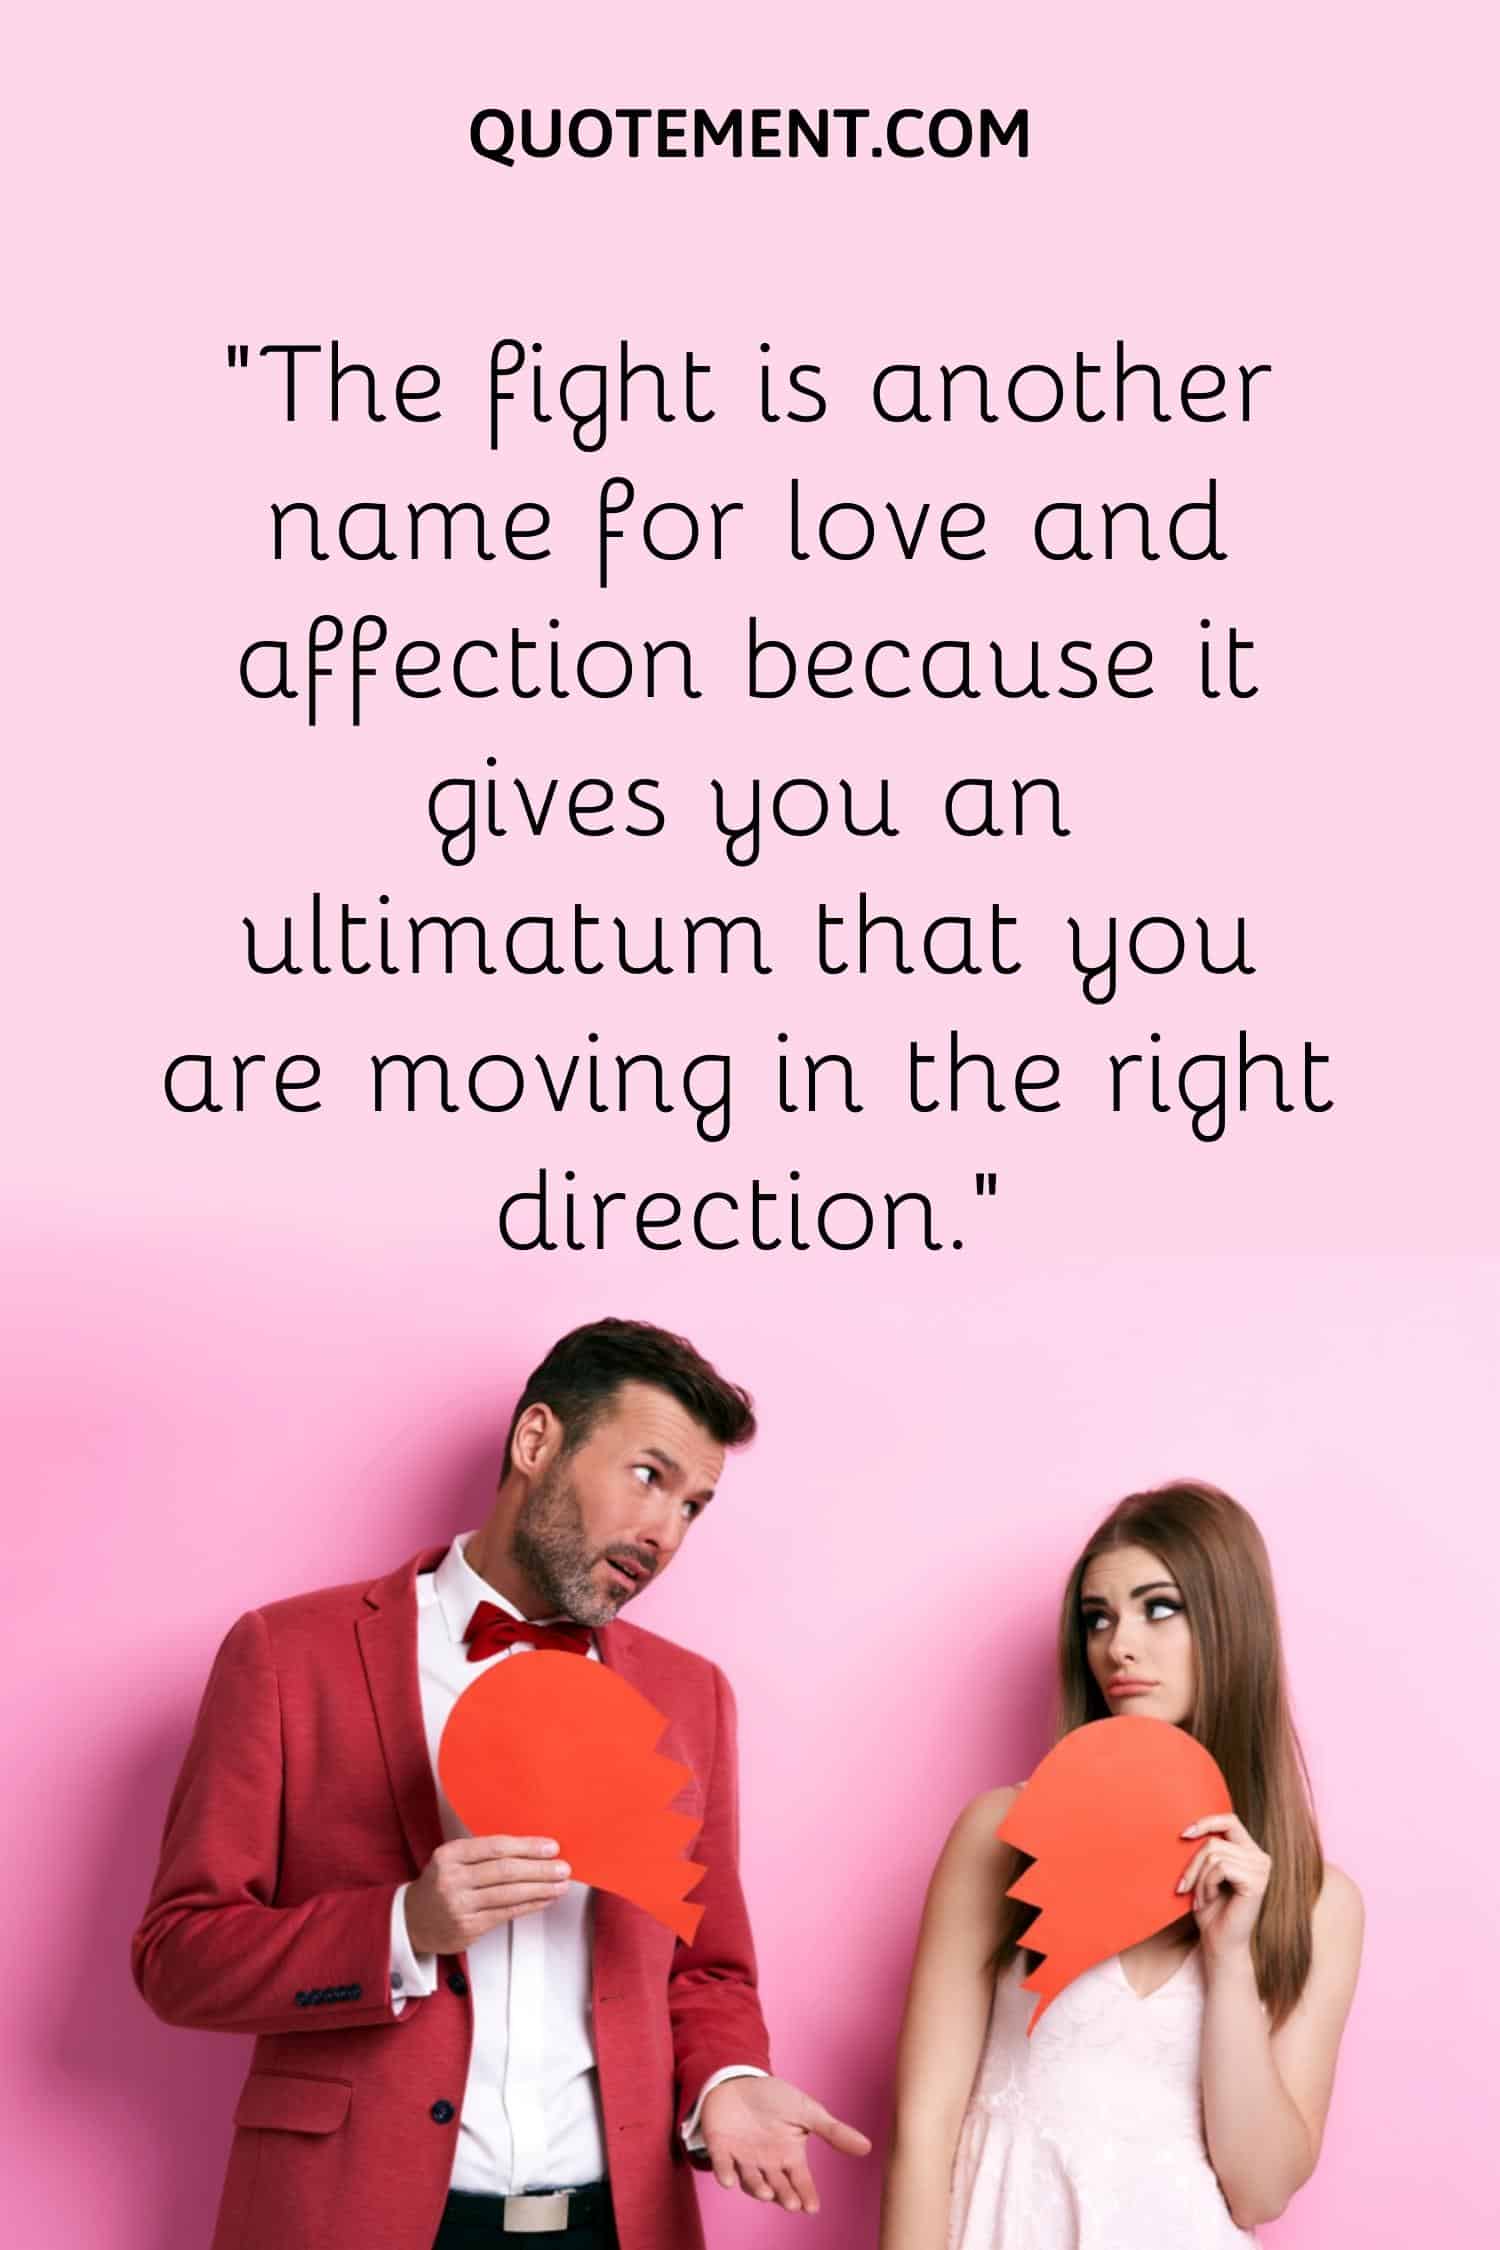 “The fight is another name for love and affection because it gives you an ultimatum that you are moving in the right direction.”